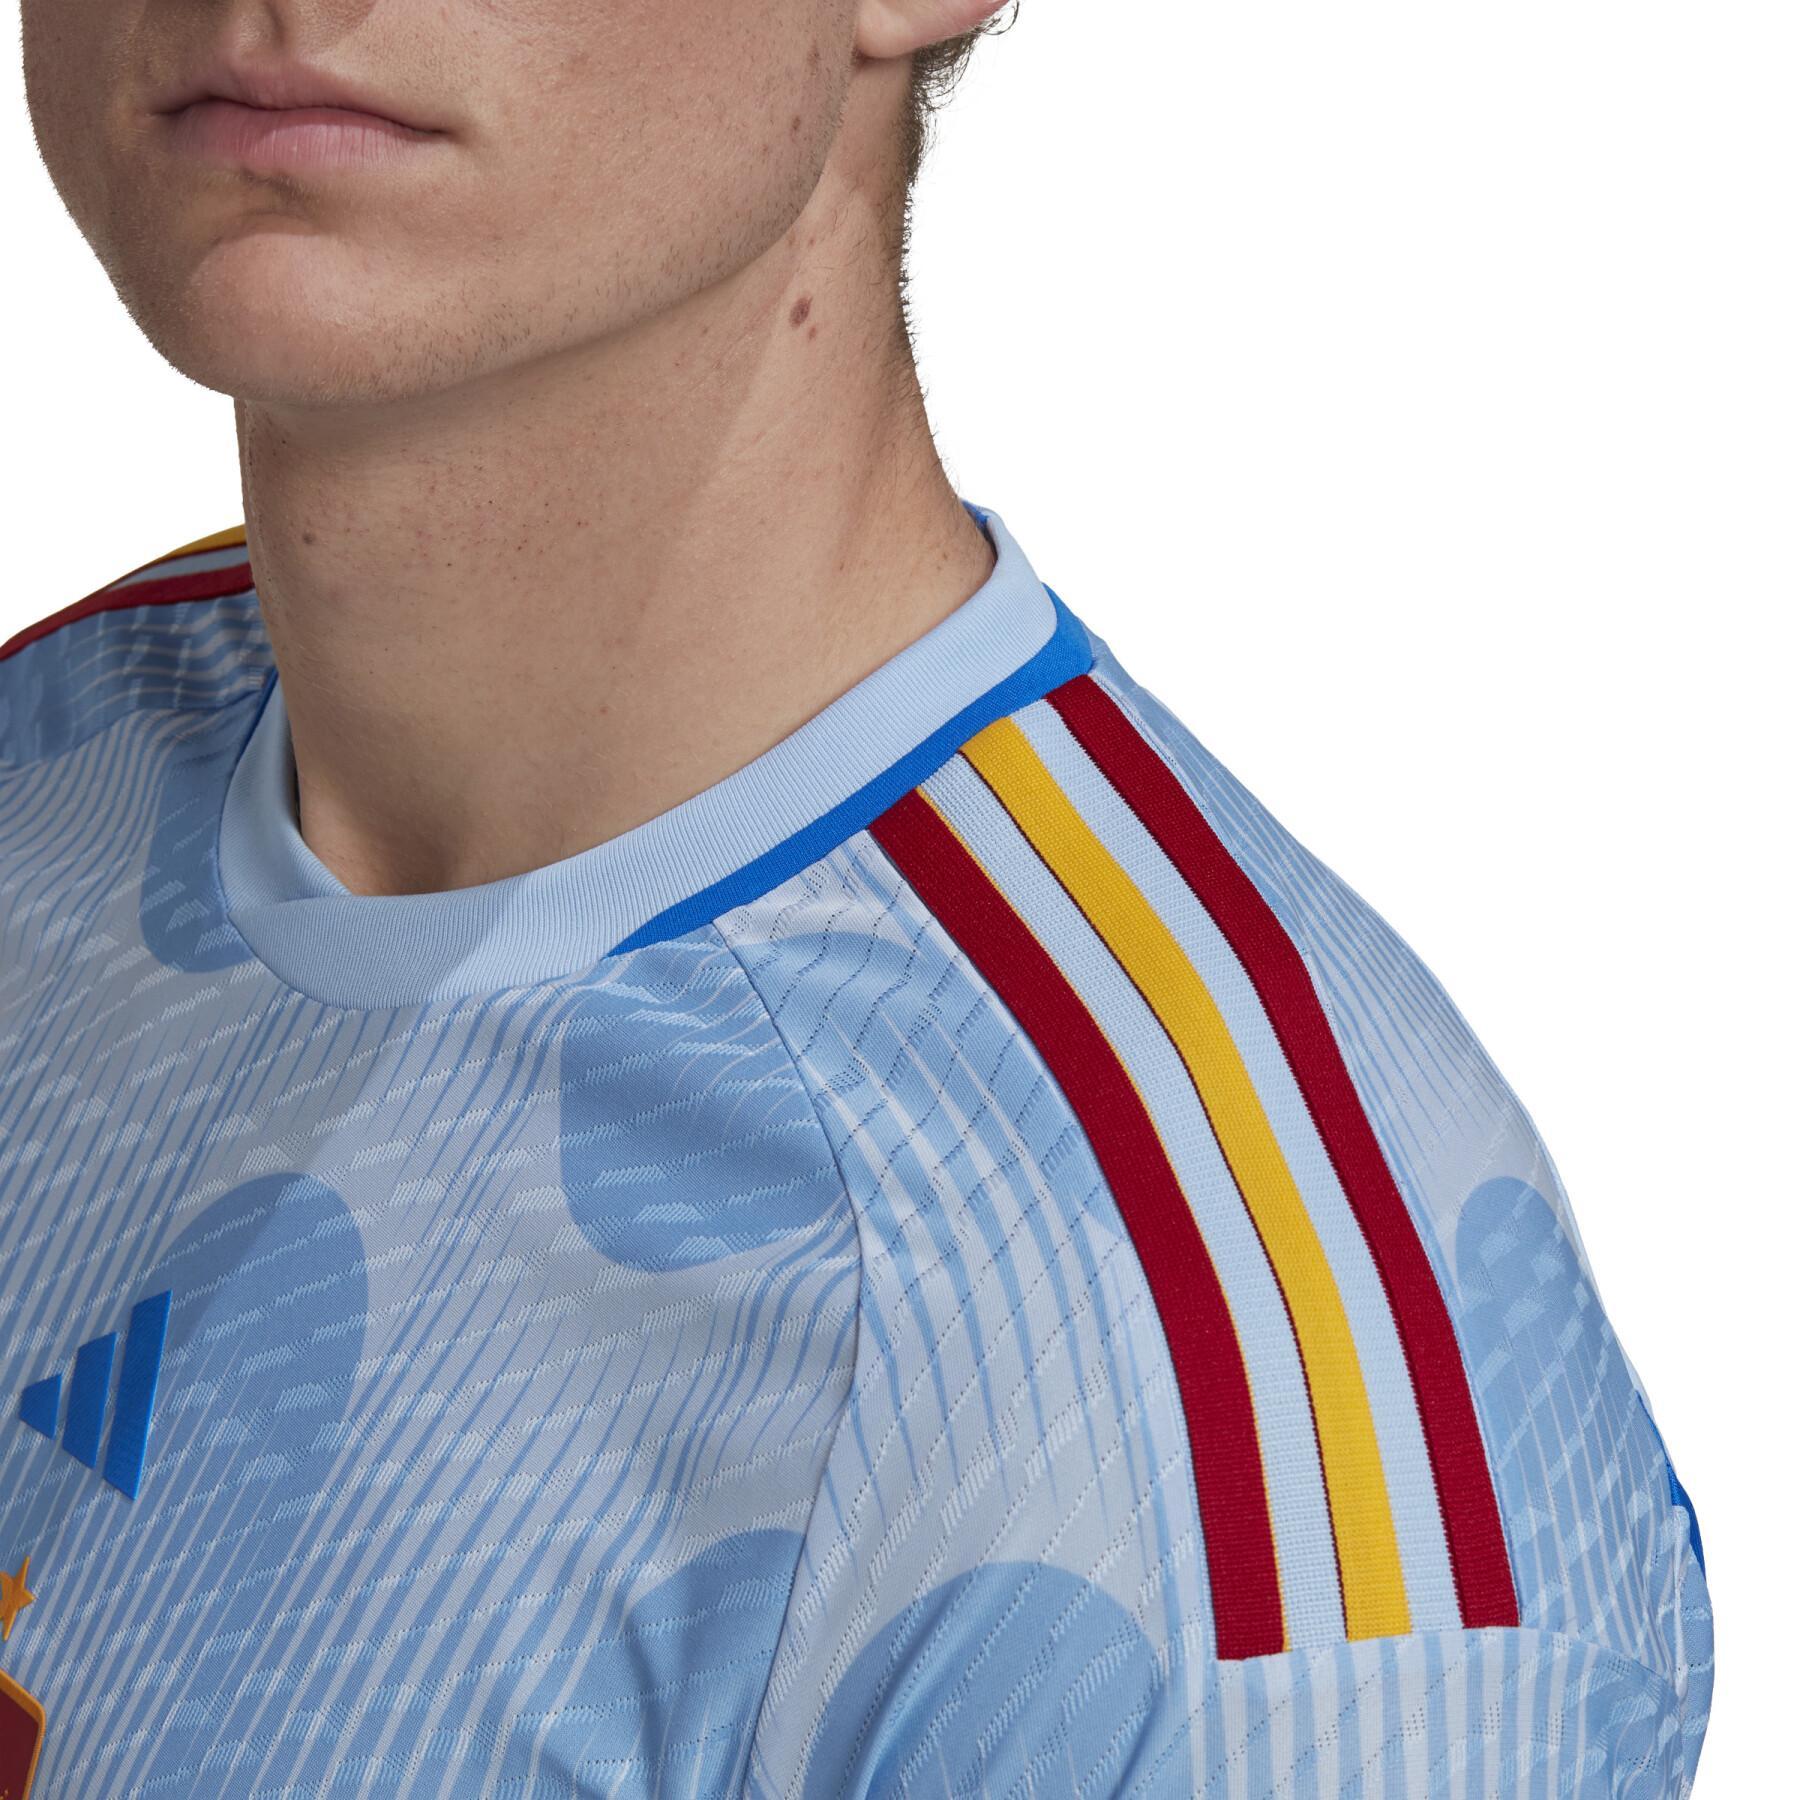 Authentic World Cup 2022 outdoor jersey Espagne